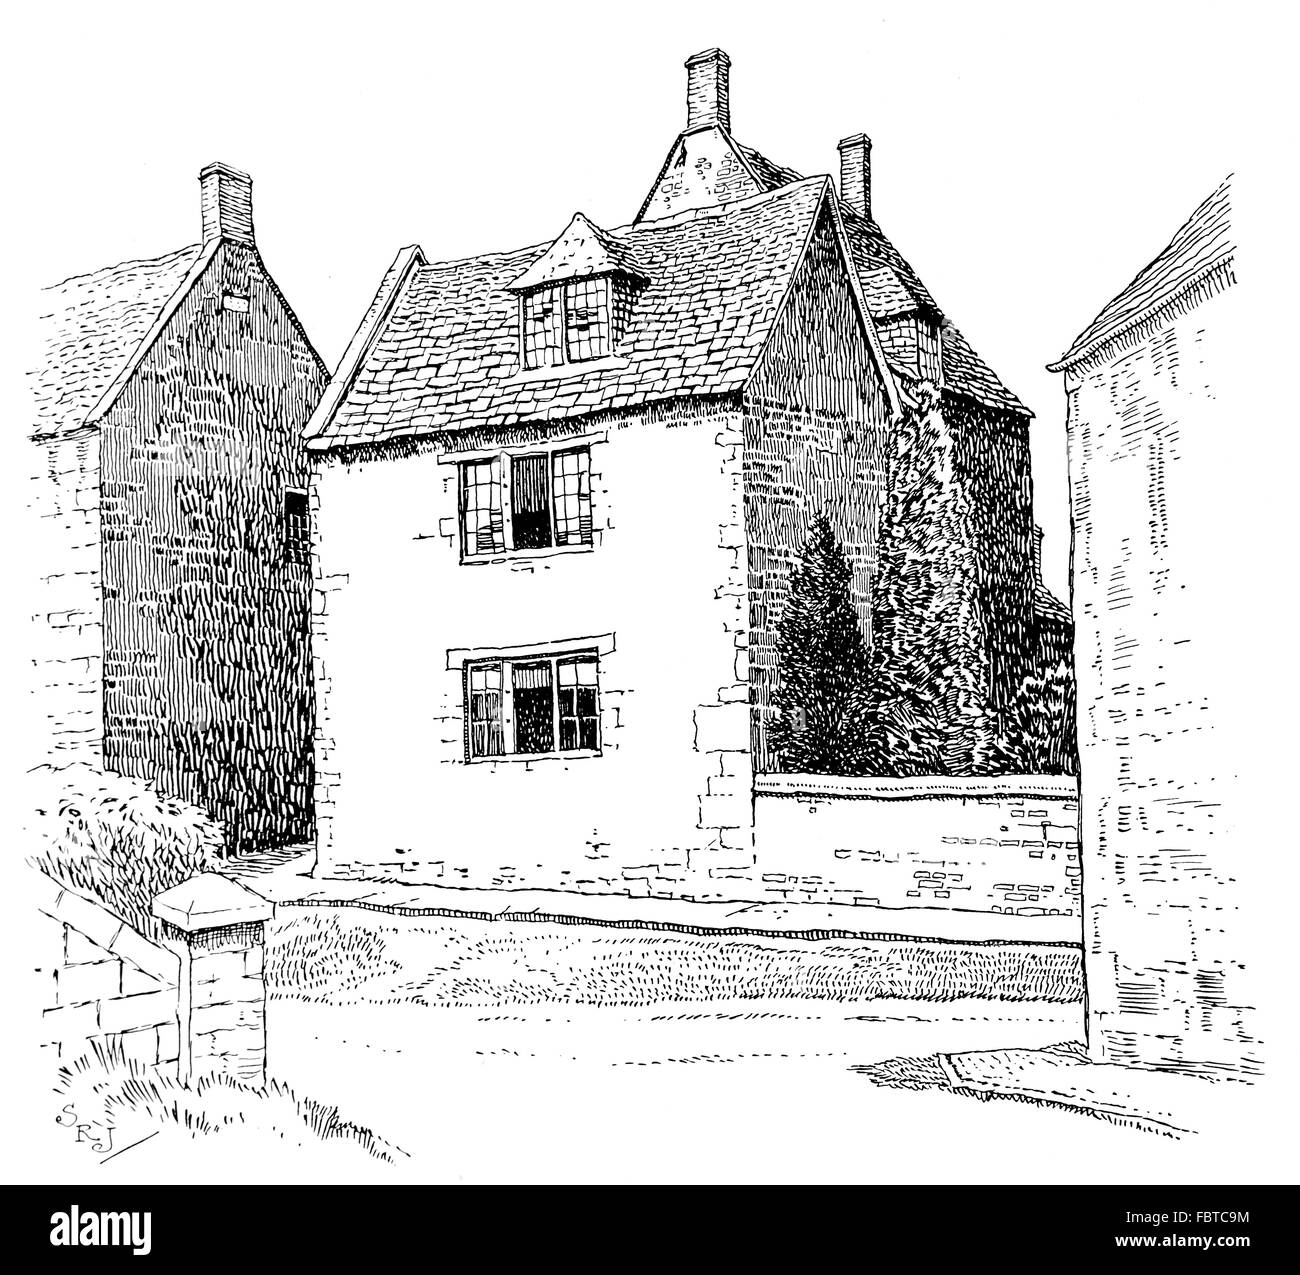 UK, England, Northamptonshire, Ashley village, old house with dormer windows in tiled roof, in 1911, line illustration Stock Photo